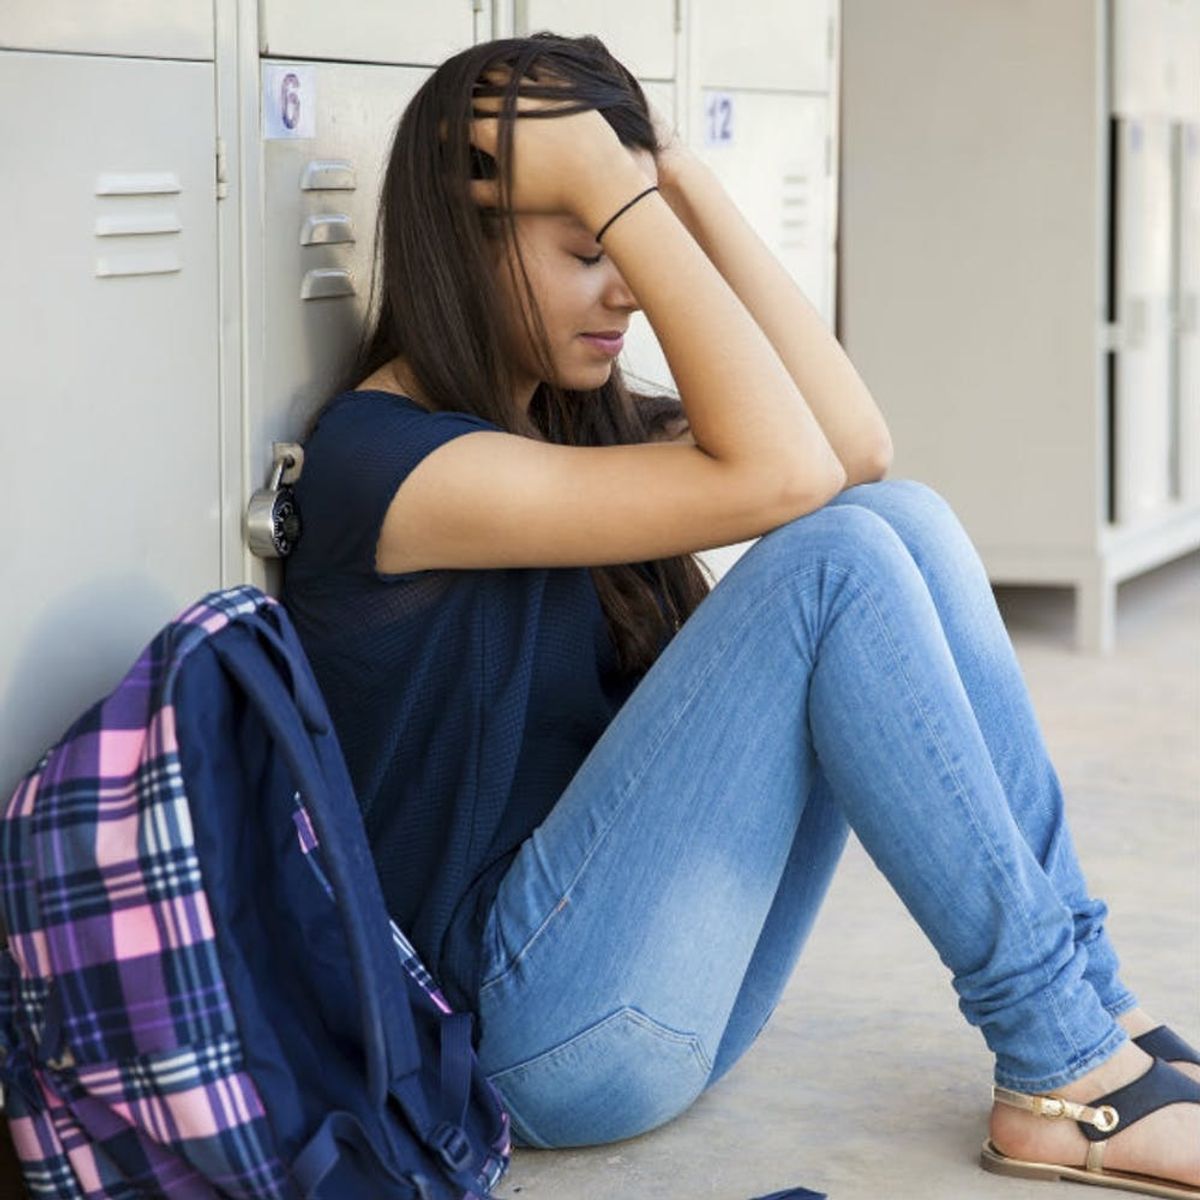 The Surprising Thing That’s Stressing Students Out MORE Than Exams